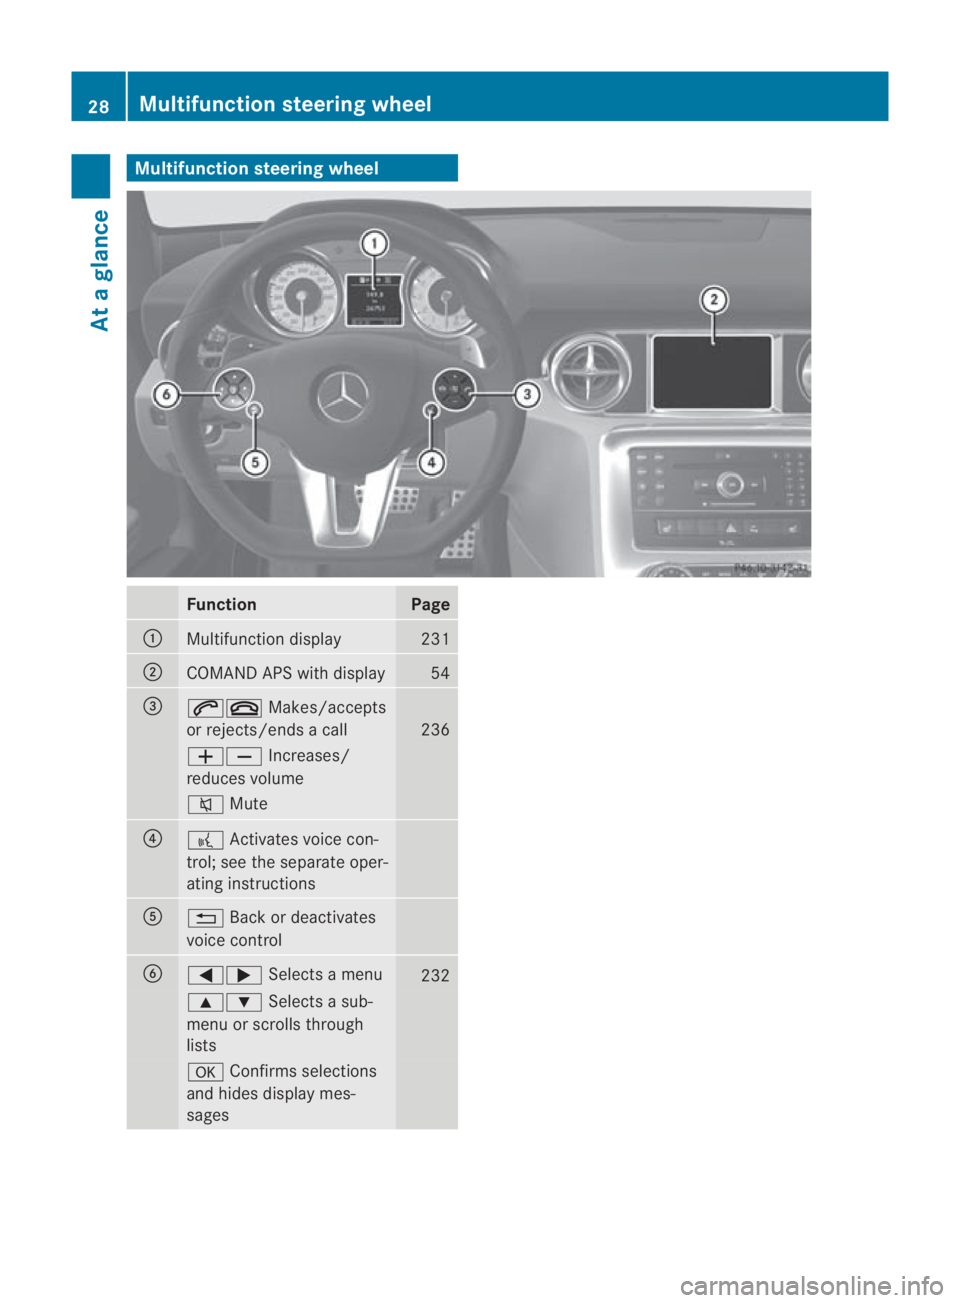 MERCEDES-BENZ SLS COUPE 2010 Owners Guide Multifunction steering wheel
Function Page
0001
Multifunction display 231
0002
COMAND APS with display 54
0015
001C0015
Makes/accepts
or rejects/ends a call 236
00050009
Increases/
reduces volume 001E